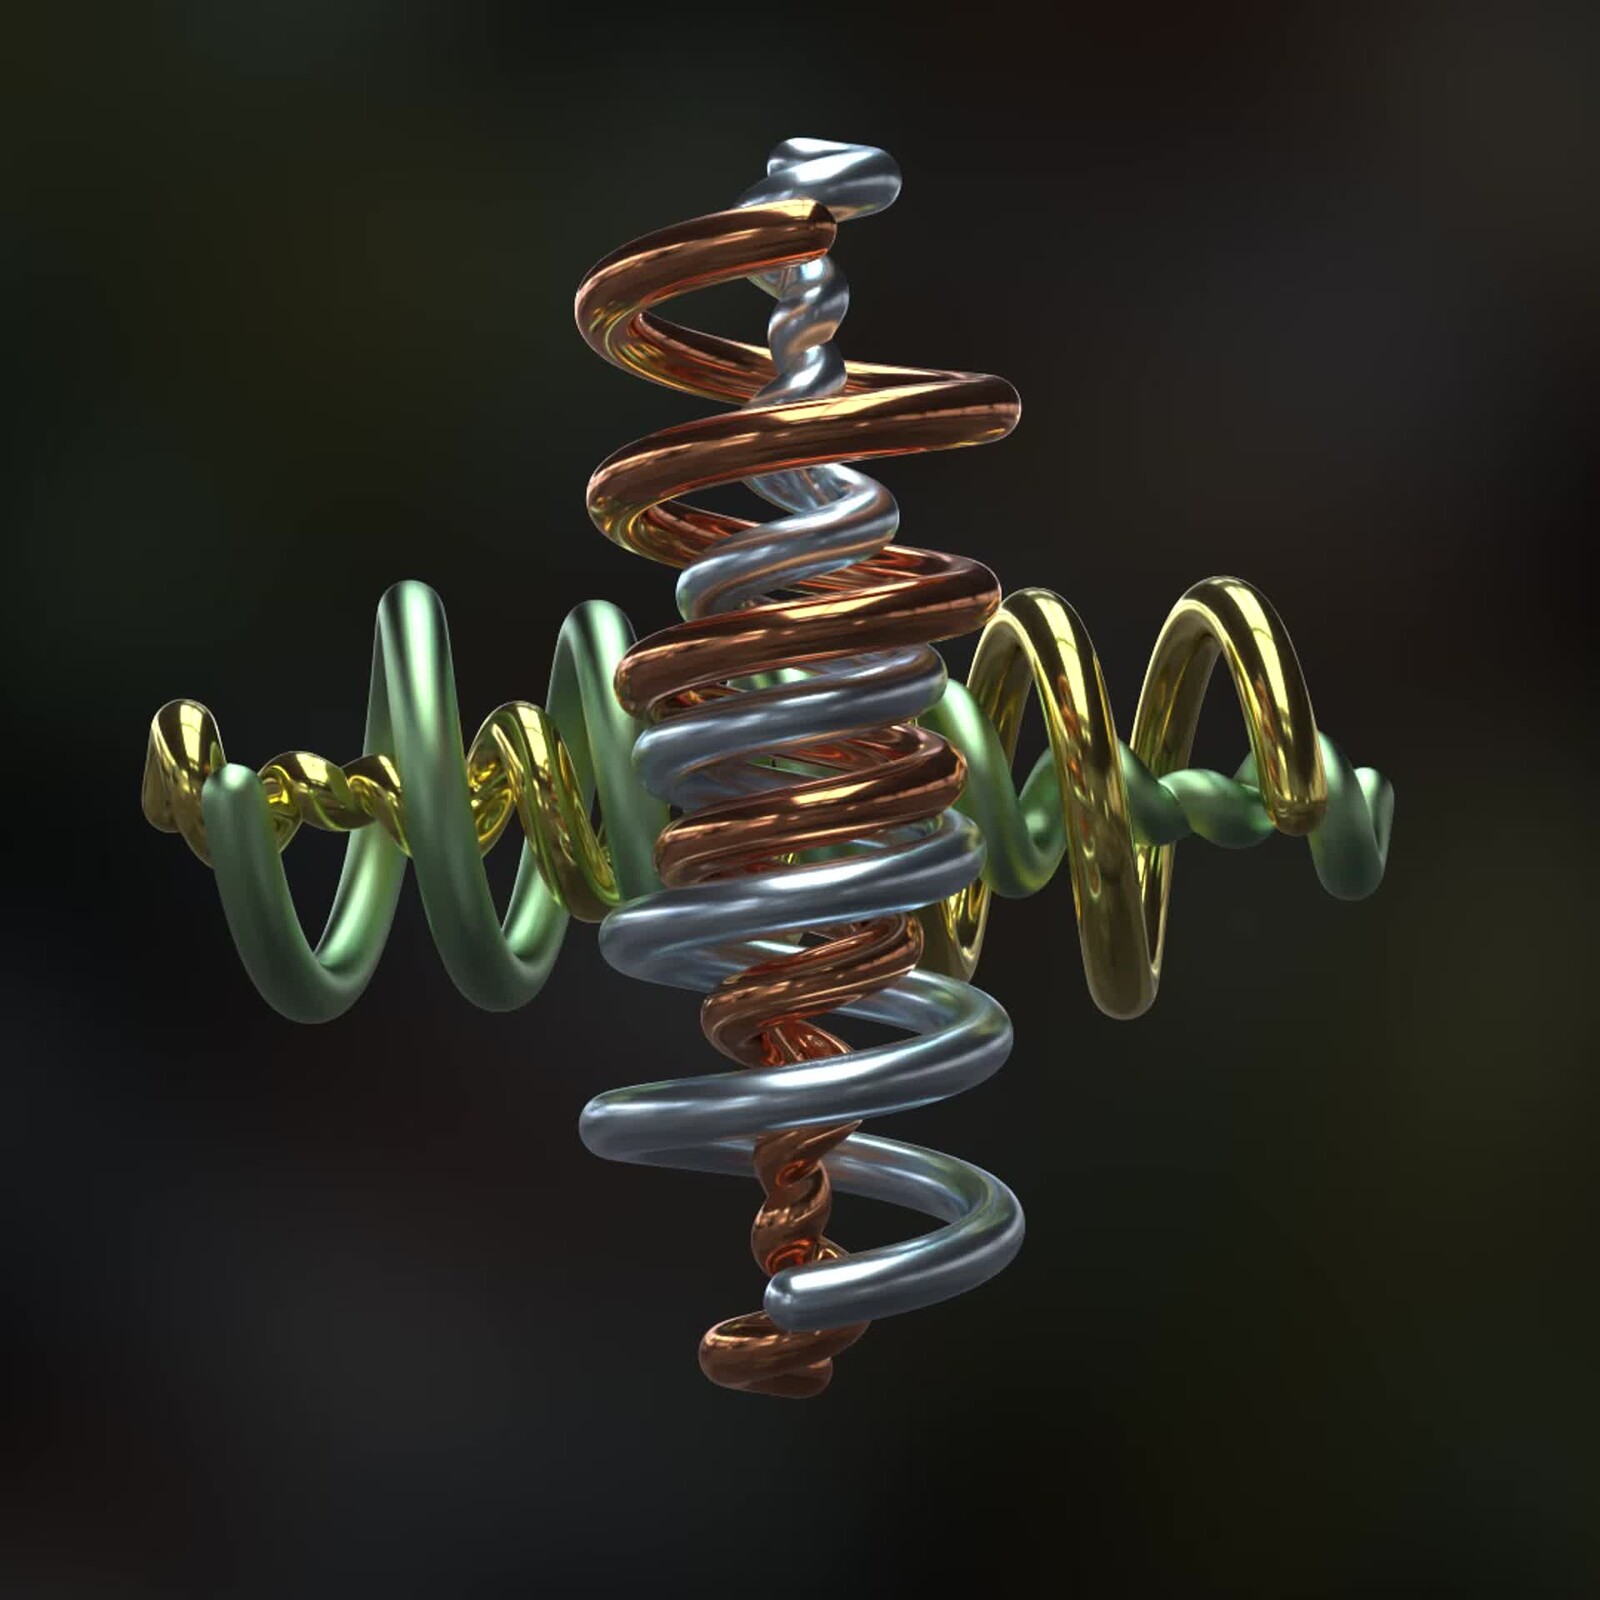 Distorted Springs shapes in Infinite Rotation...